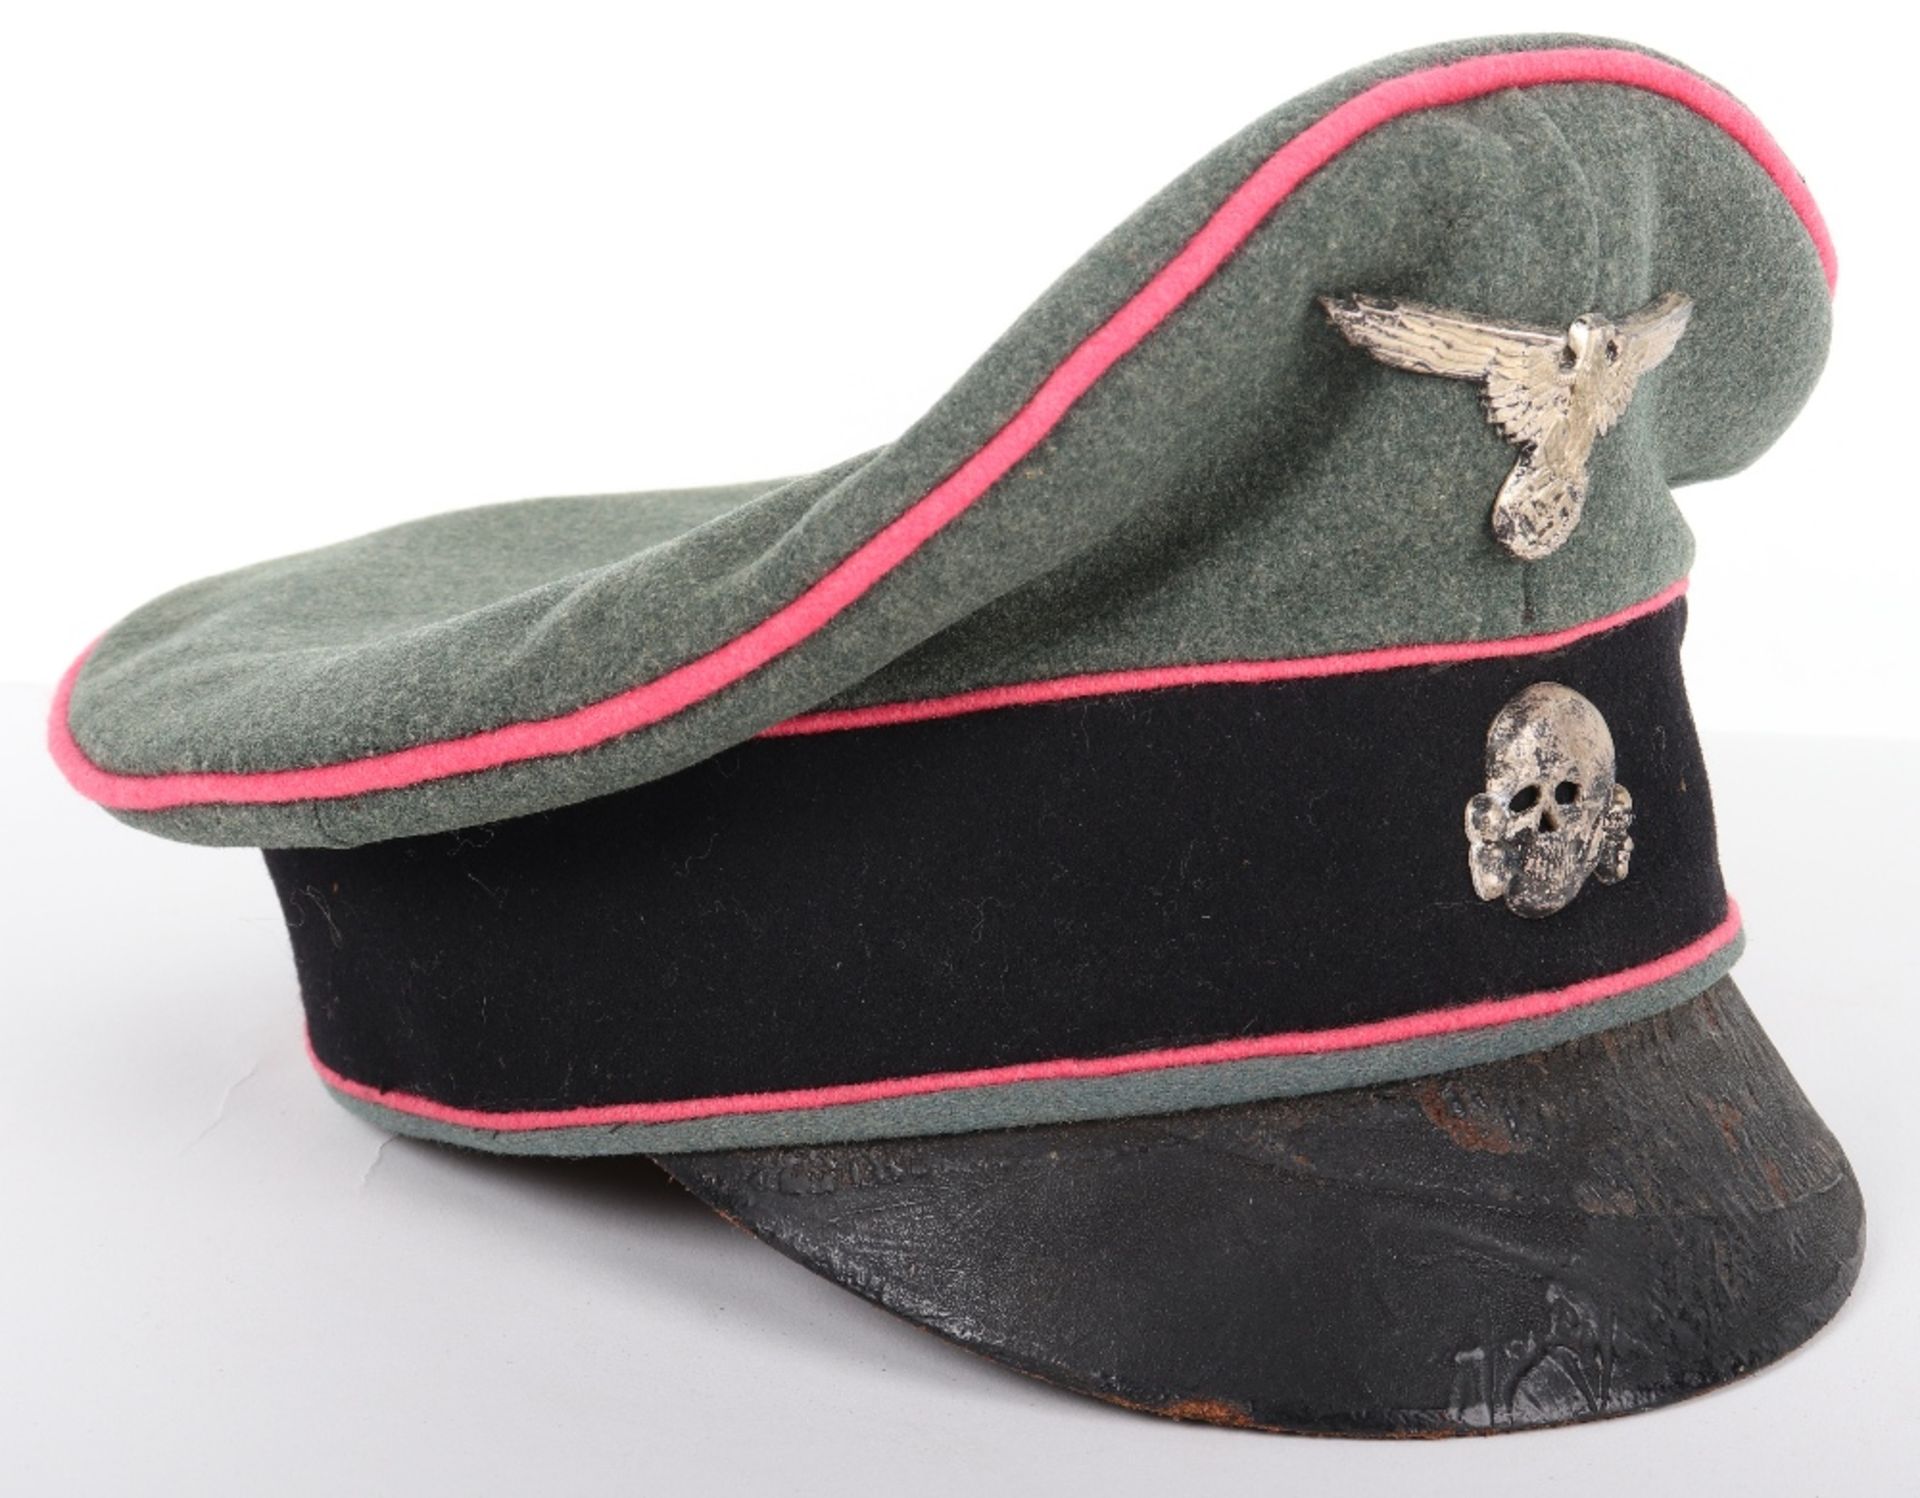 Waffen-SS Panzer Officers Crusher Cap - Image 3 of 6